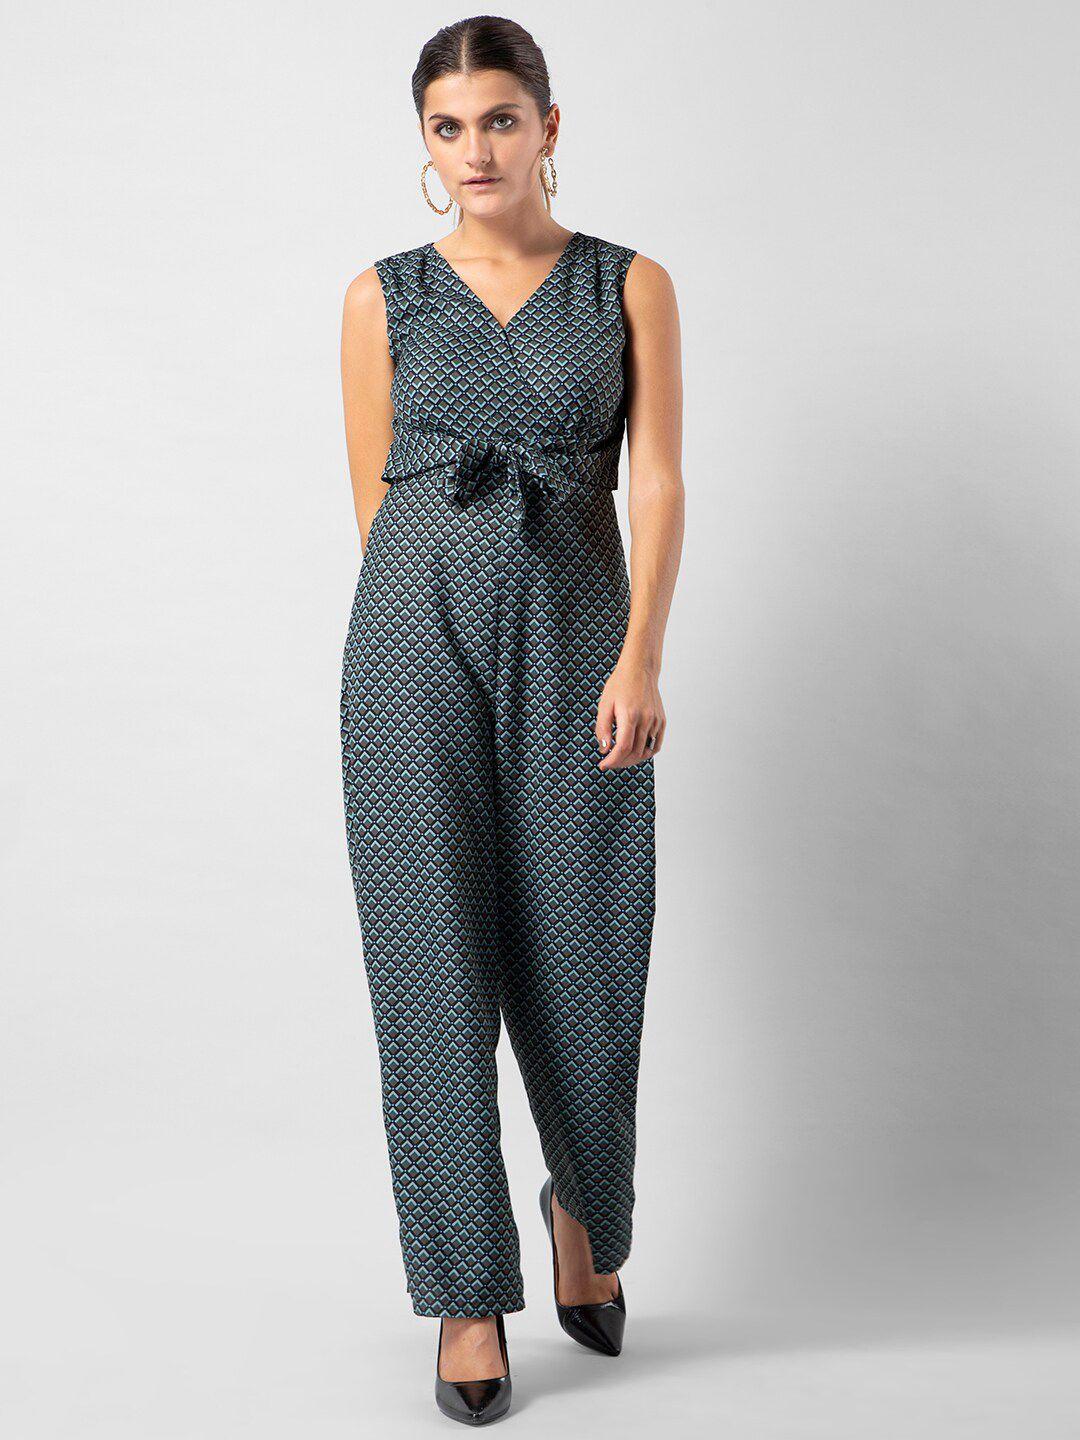 faballey green & black printed basic jumpsuit